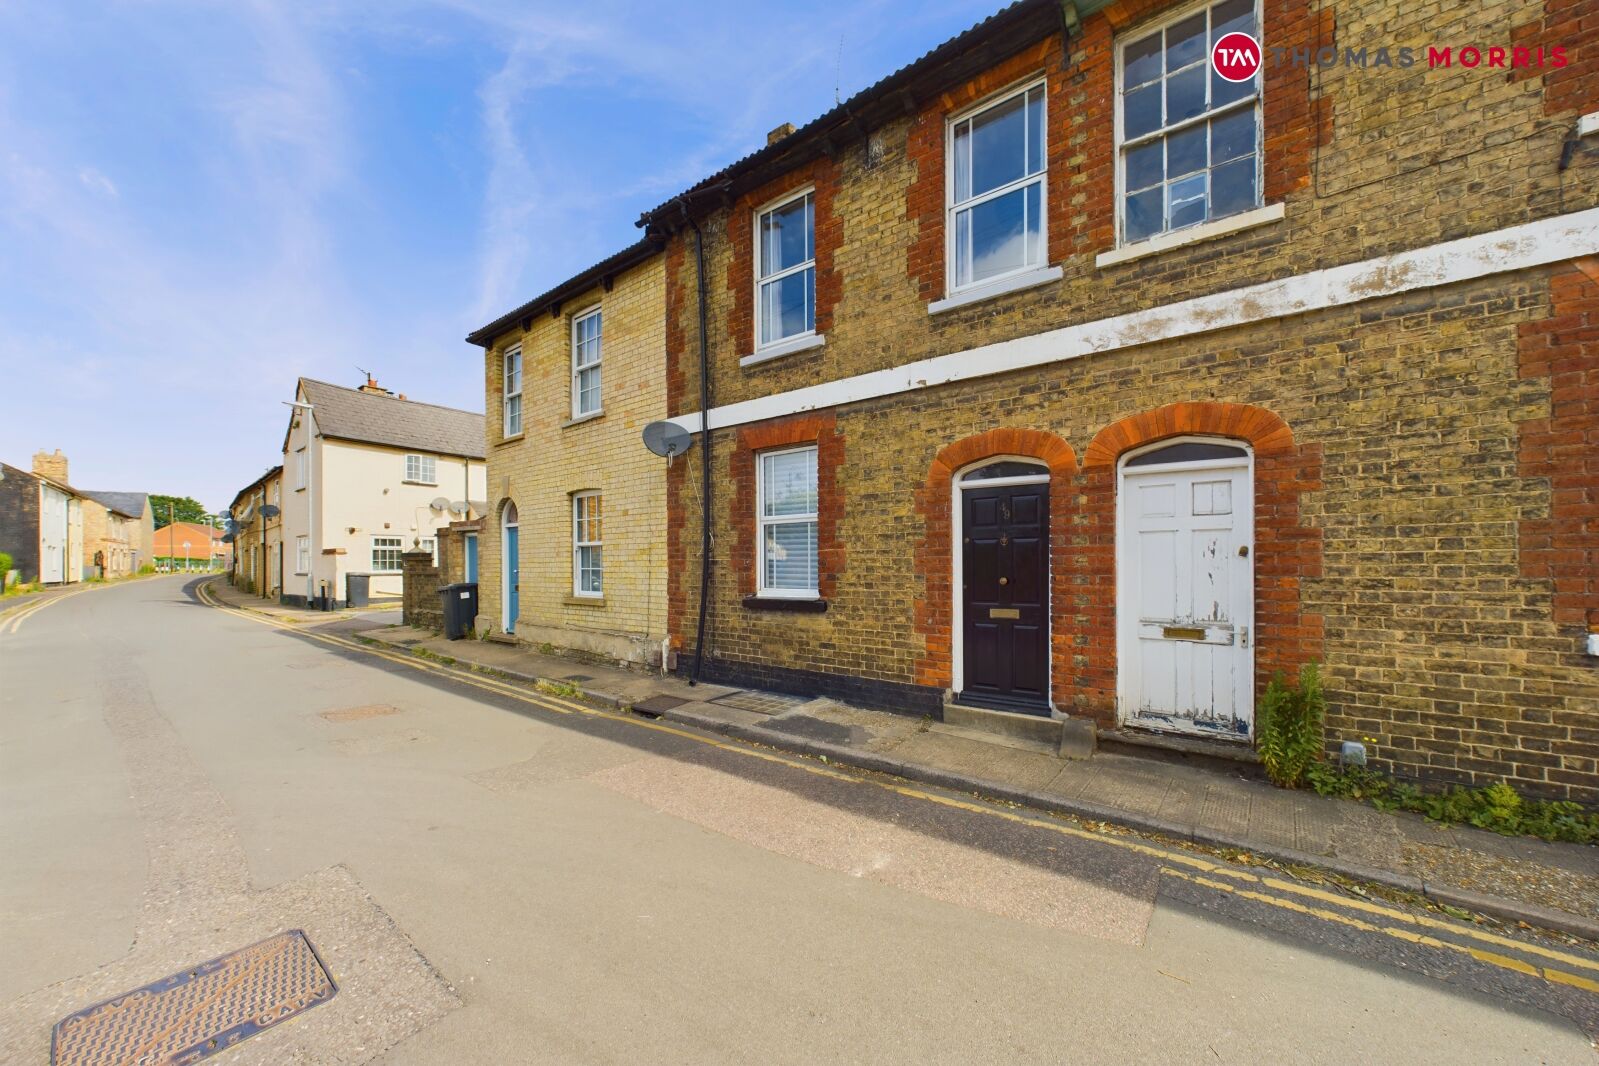 3 bedroom mid terraced house for sale Great Northern Street, Huntingdon, PE29, main image